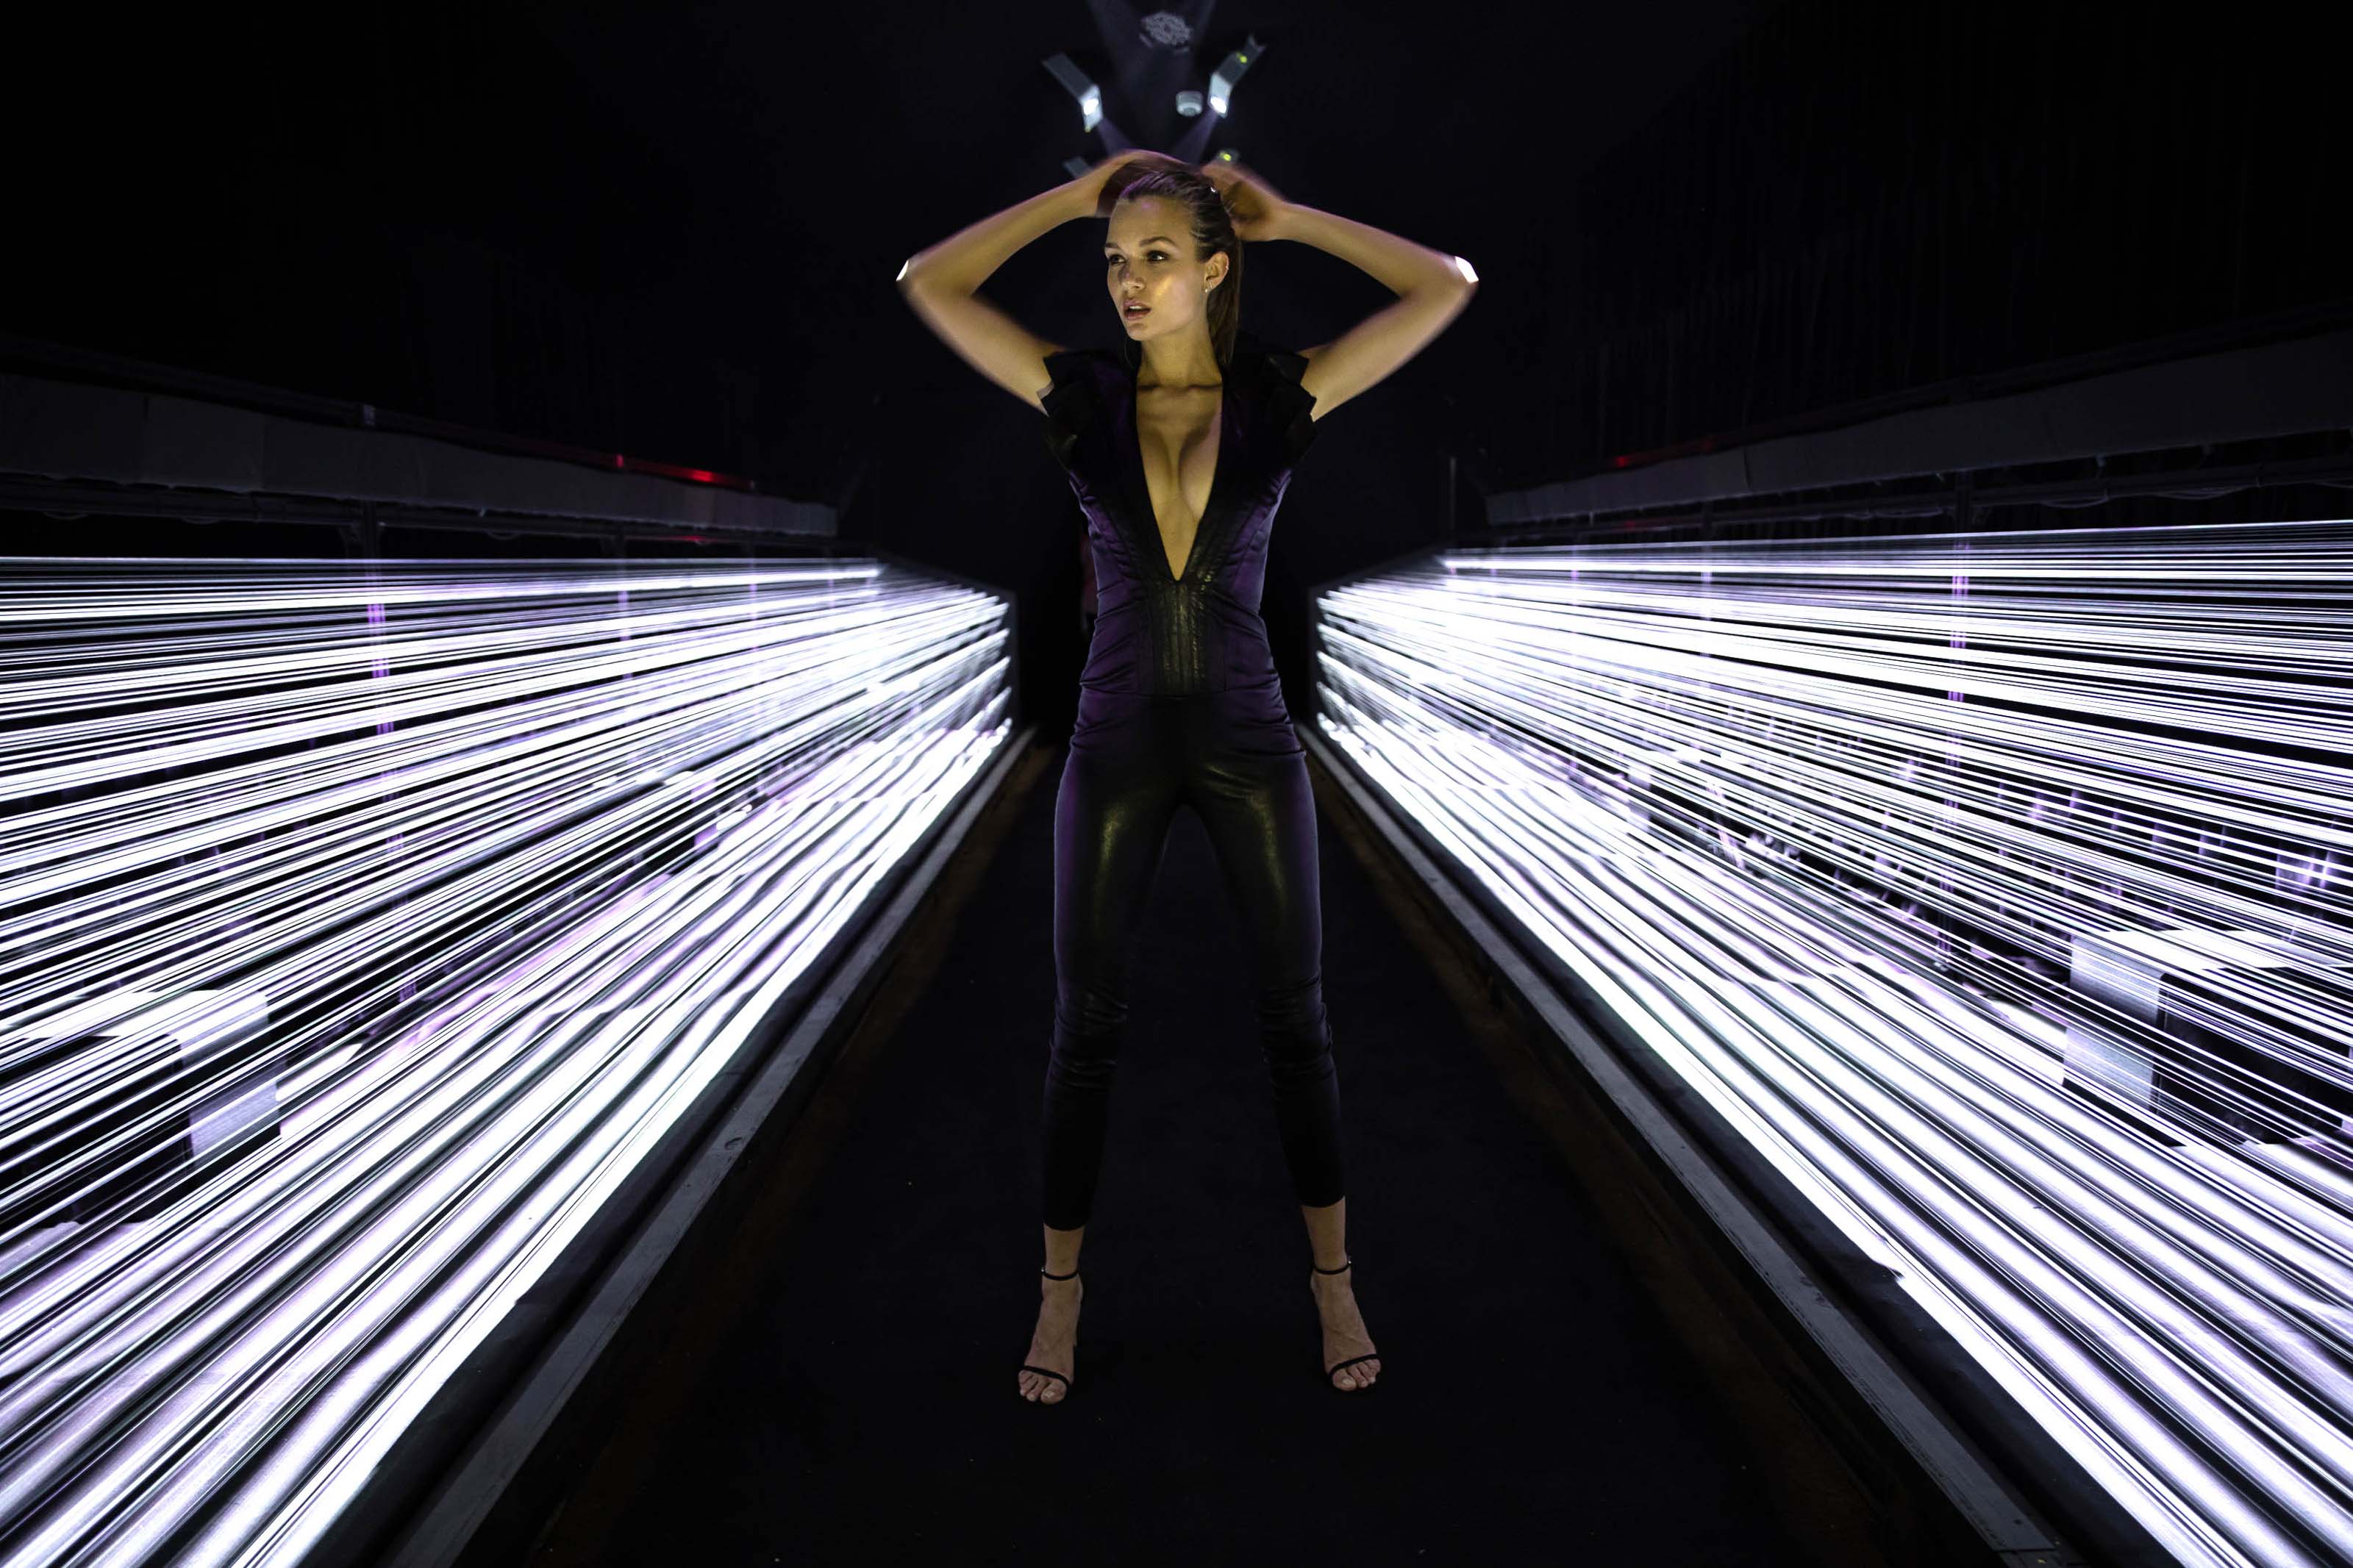 Josephine Skriver attends Acoustic Vessel ‘Odyessey’ Tunnel Sony`s #LostInMusic SXSW Festival